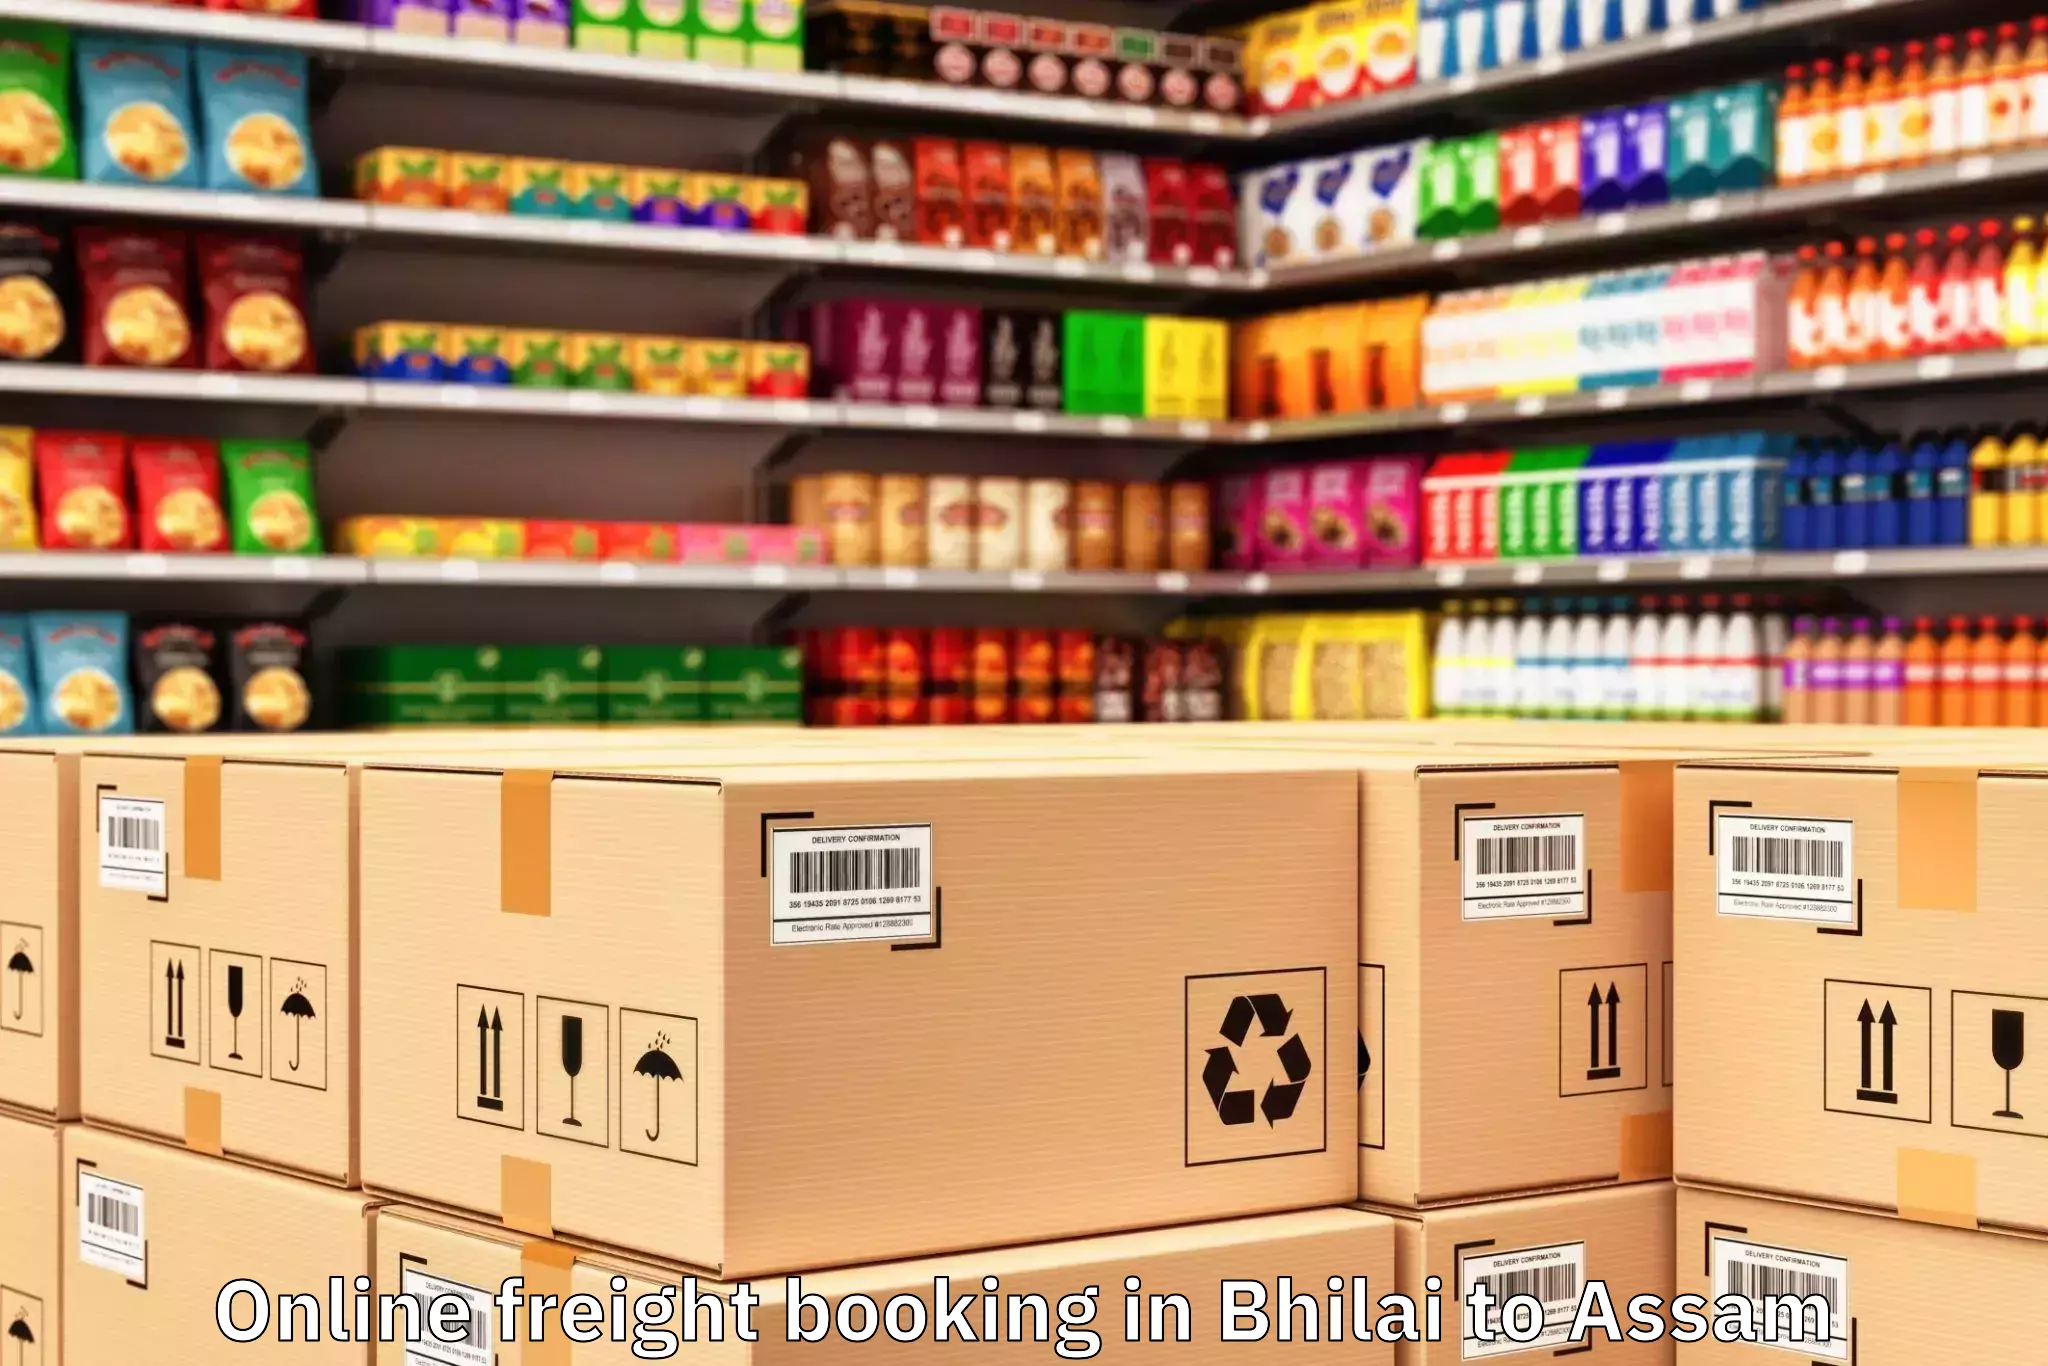 Top Bhilai to Helem Online Freight Booking Available